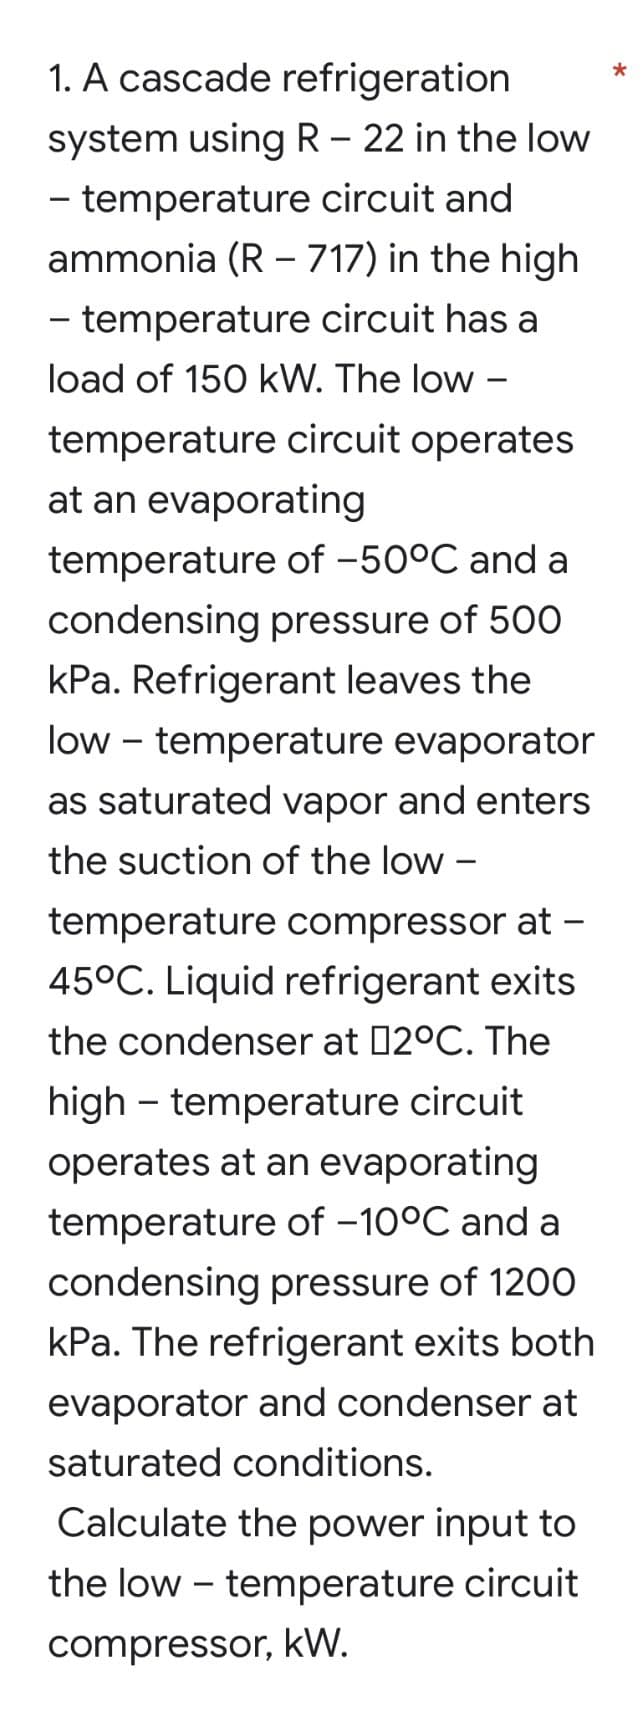 *
1. A cascade refrigeration
system using R - 22 in the low
- temperature circuit and
ammonia (R - 717) in the high
- temperature circuit has a
load of 150 kW. The low -
temperature circuit operates
at an evaporating
temperature of -50°C and a
condensing pressure of 500
kPa. Refrigerant leaves the
low temperature evaporator
as saturated vapor and enters
the suction of the low -
mperature compressor at -
45°C. Liquid refrigerant exits
the condenser at 02°C. The
high temperature circuit
operates at an evaporating
temperature of -10°C and a
condensing pressure of 1200
kPa. The refrigerant exits both
evaporator and condenser at
saturated conditions.
Calculate the power input to
the low-temperature circuit
compressor, kW.